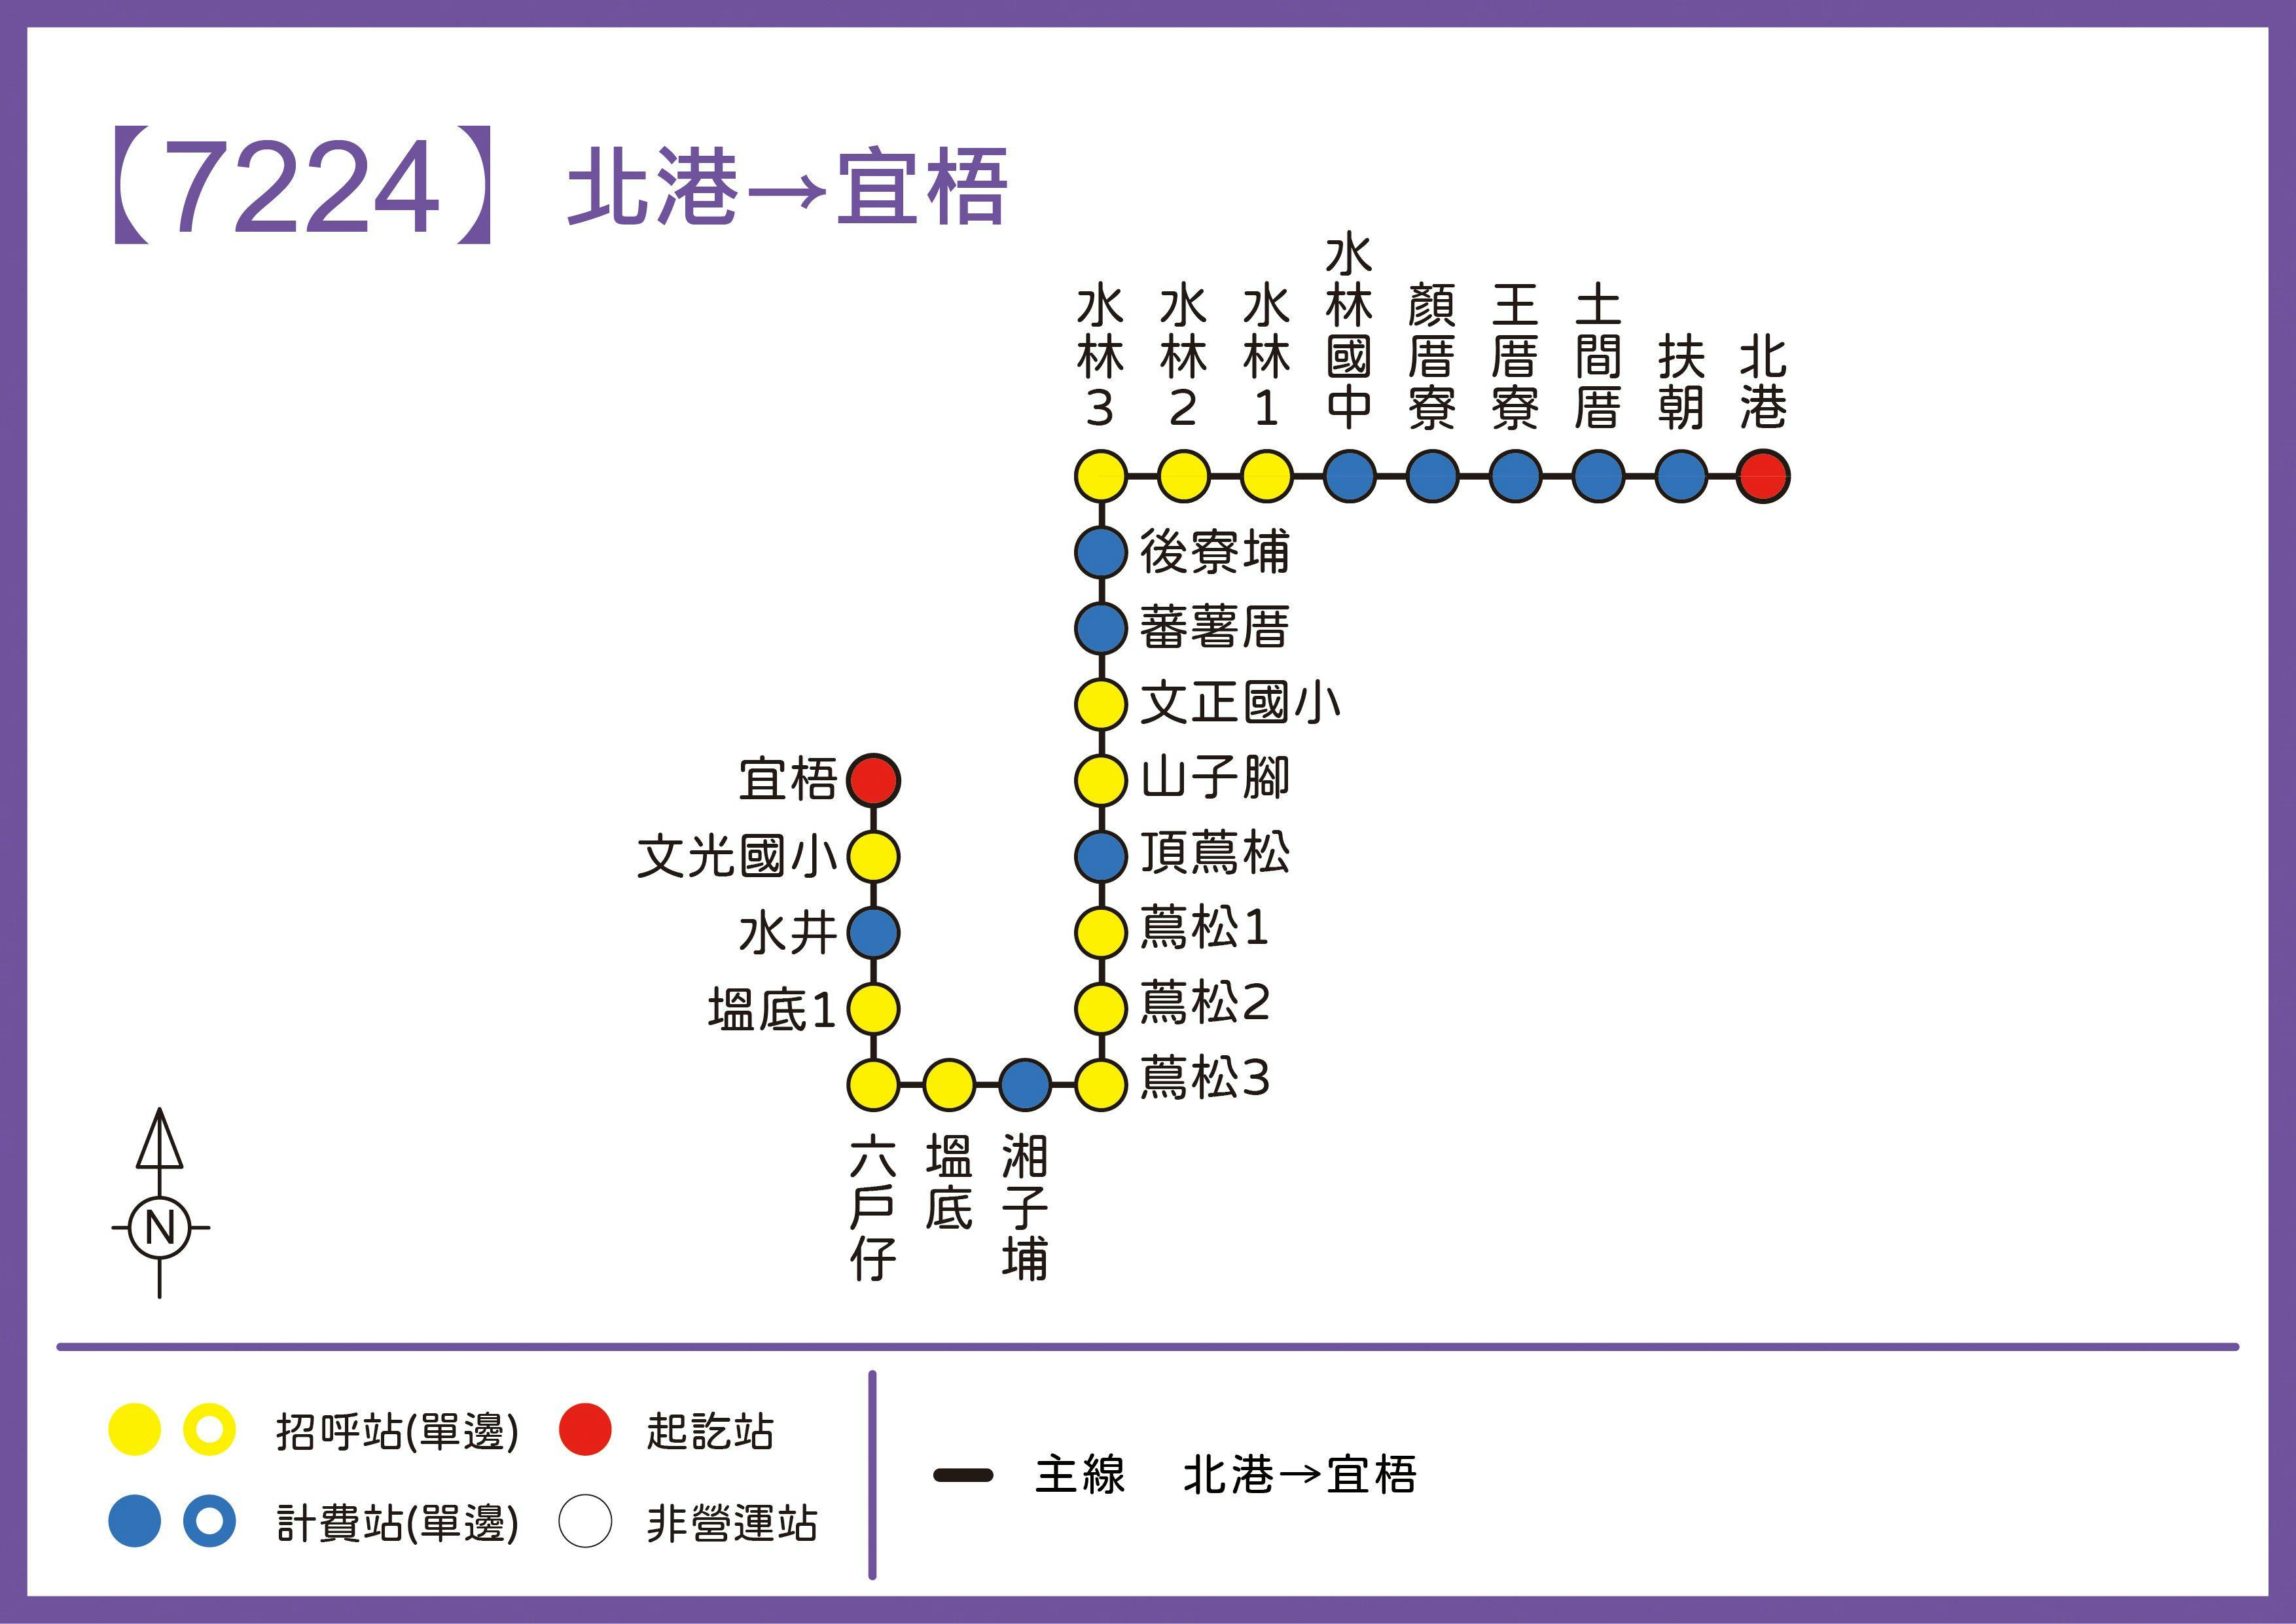 7224Route Map-Chiayi Bus